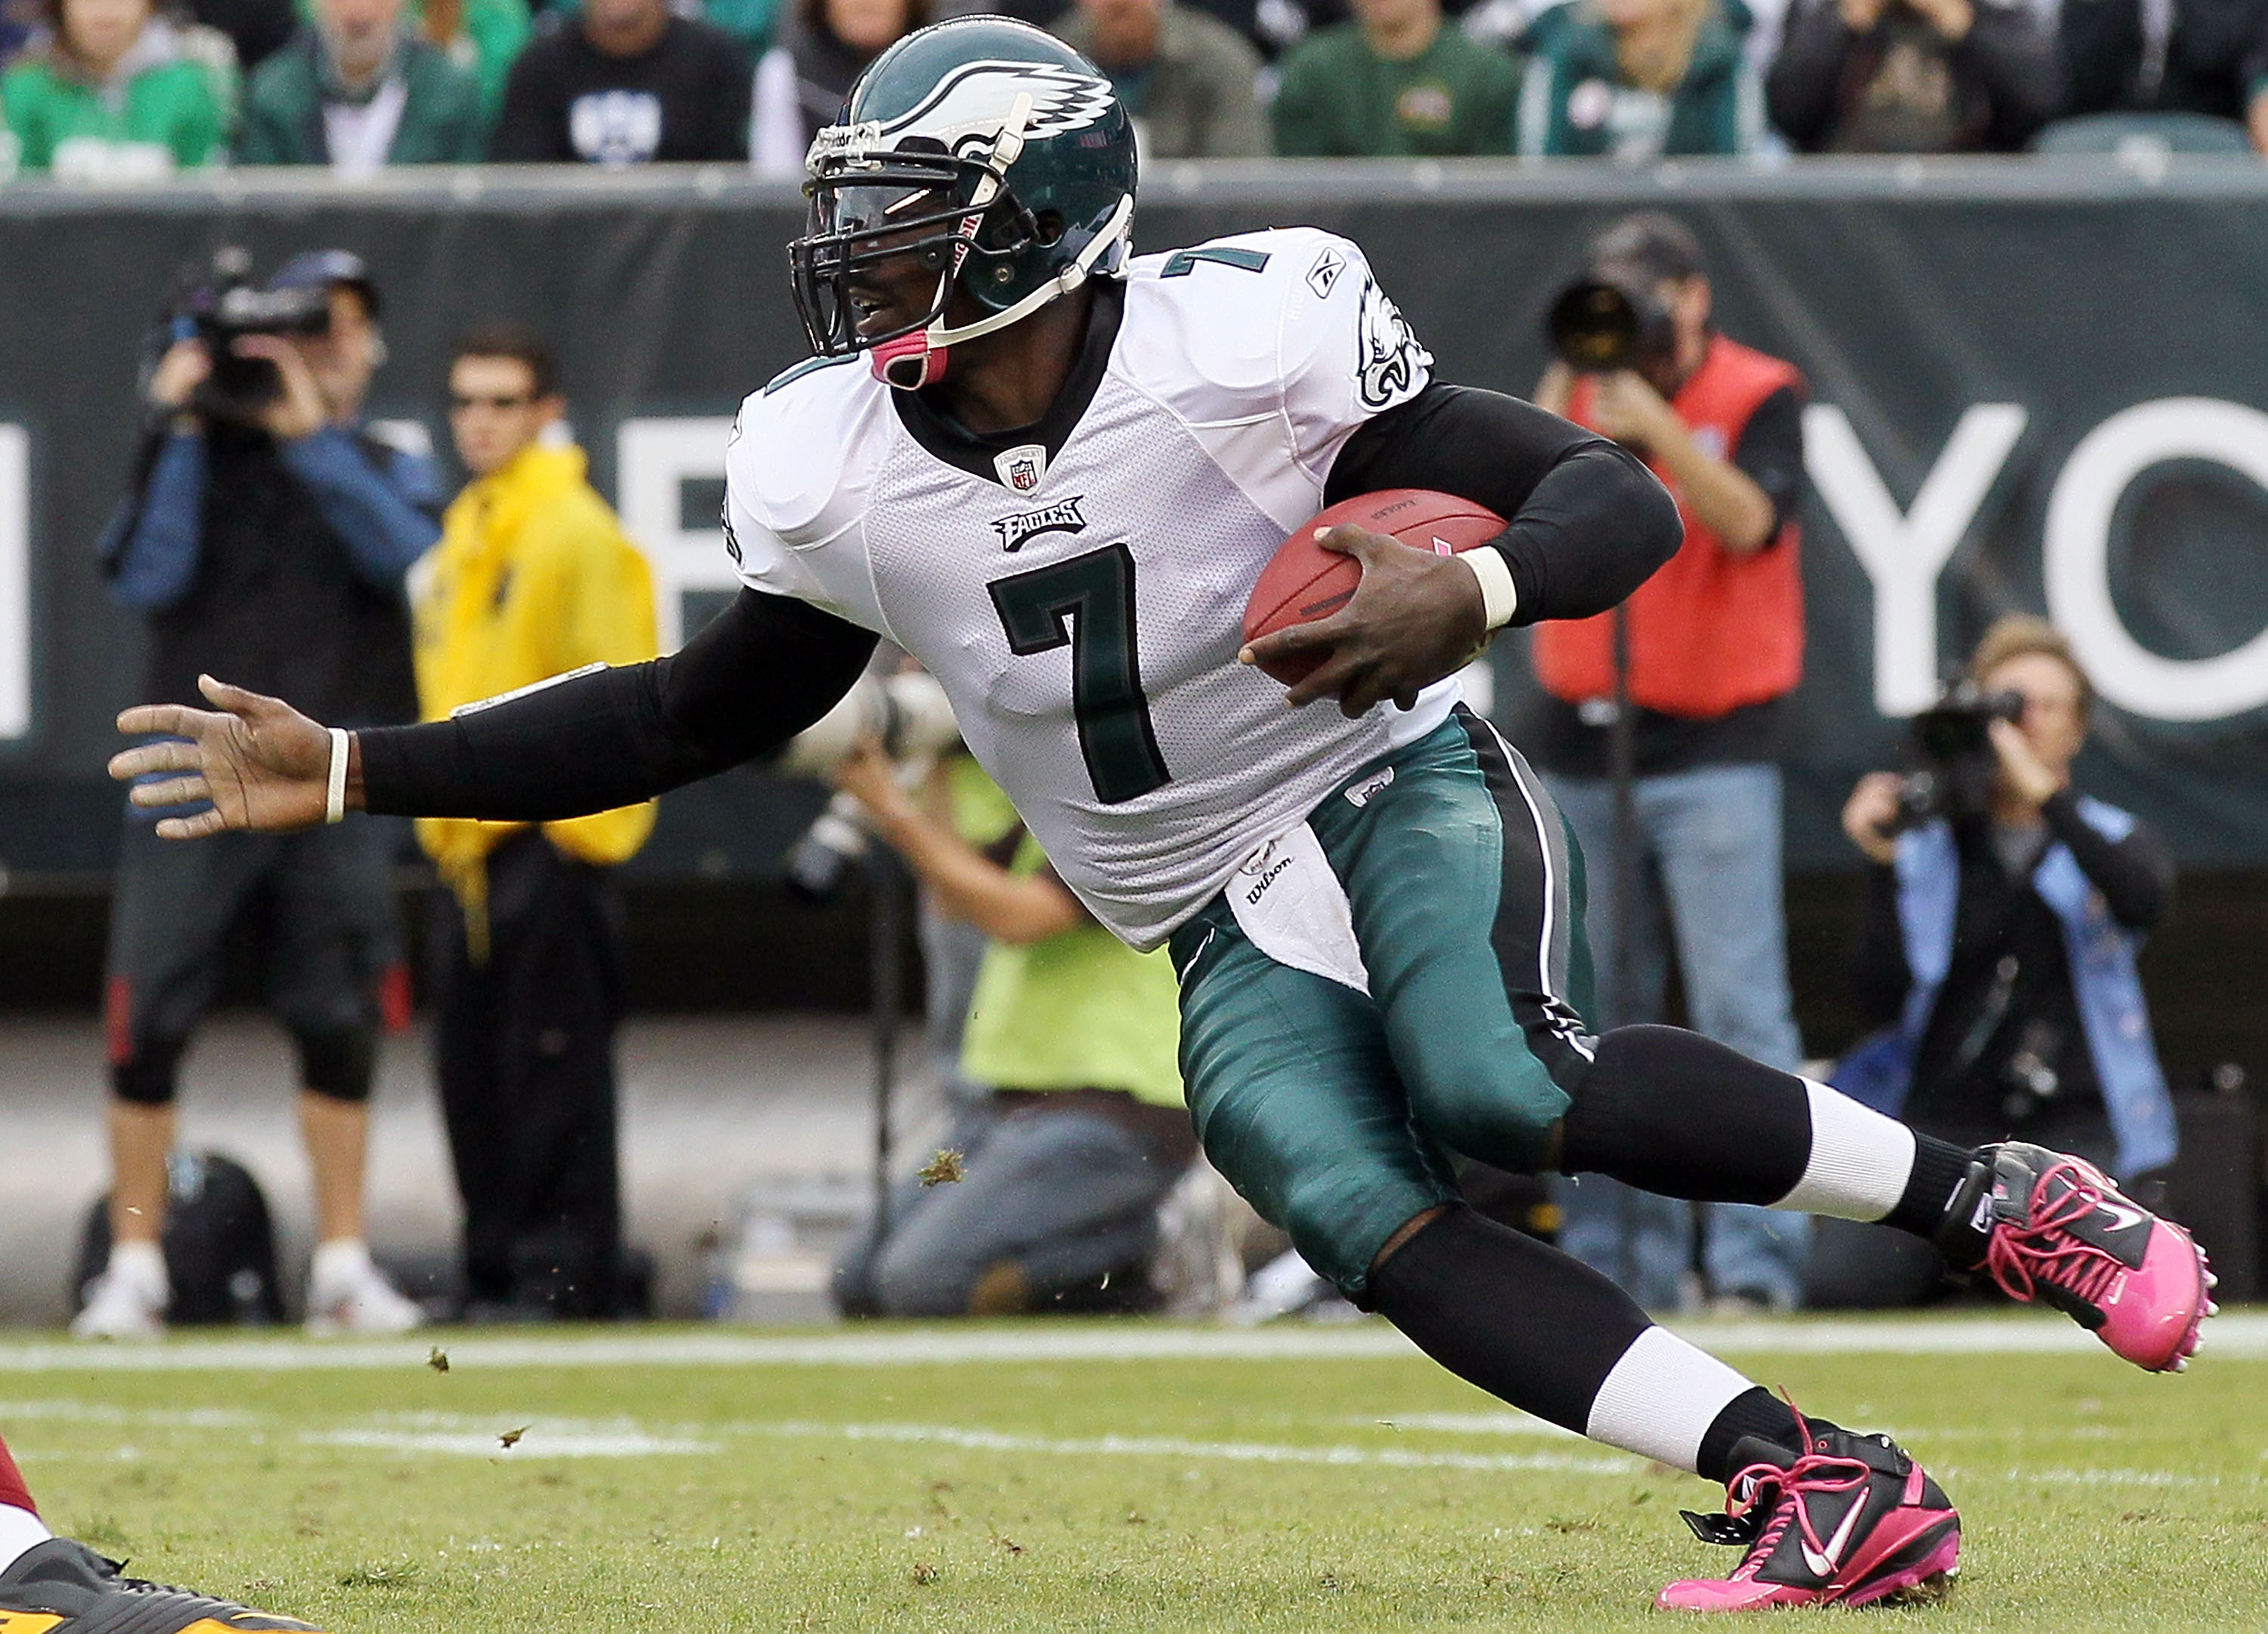 Flashback Friday: Remember when Michael Vick ate the Redskins alive?